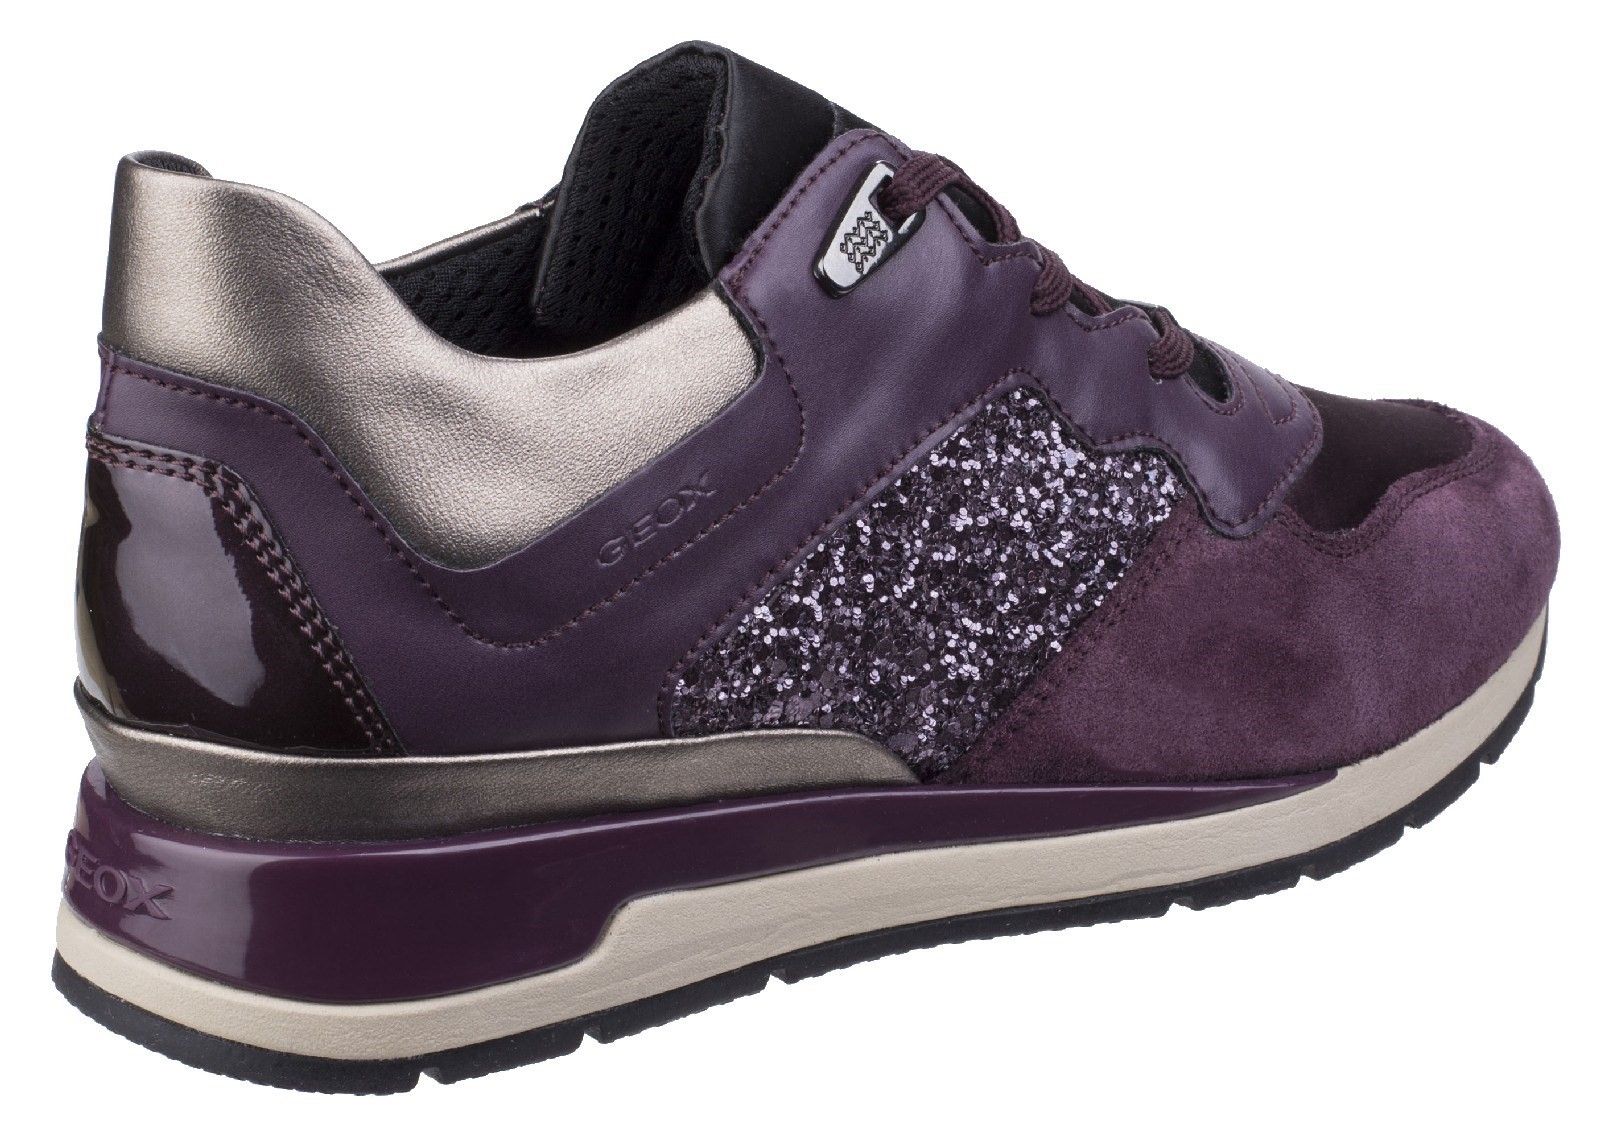 Women's sneakers for everyday casual occasions. Geox patented perforated sole for breathability and performance. Stylish upper with patent leather. Removable insole for a comfortable fit. Lightweight outsole for extreme cushioning and flexibility.Essential. 
Comfort Fit. 
Versatile. 
Anti-Slip Outsole.